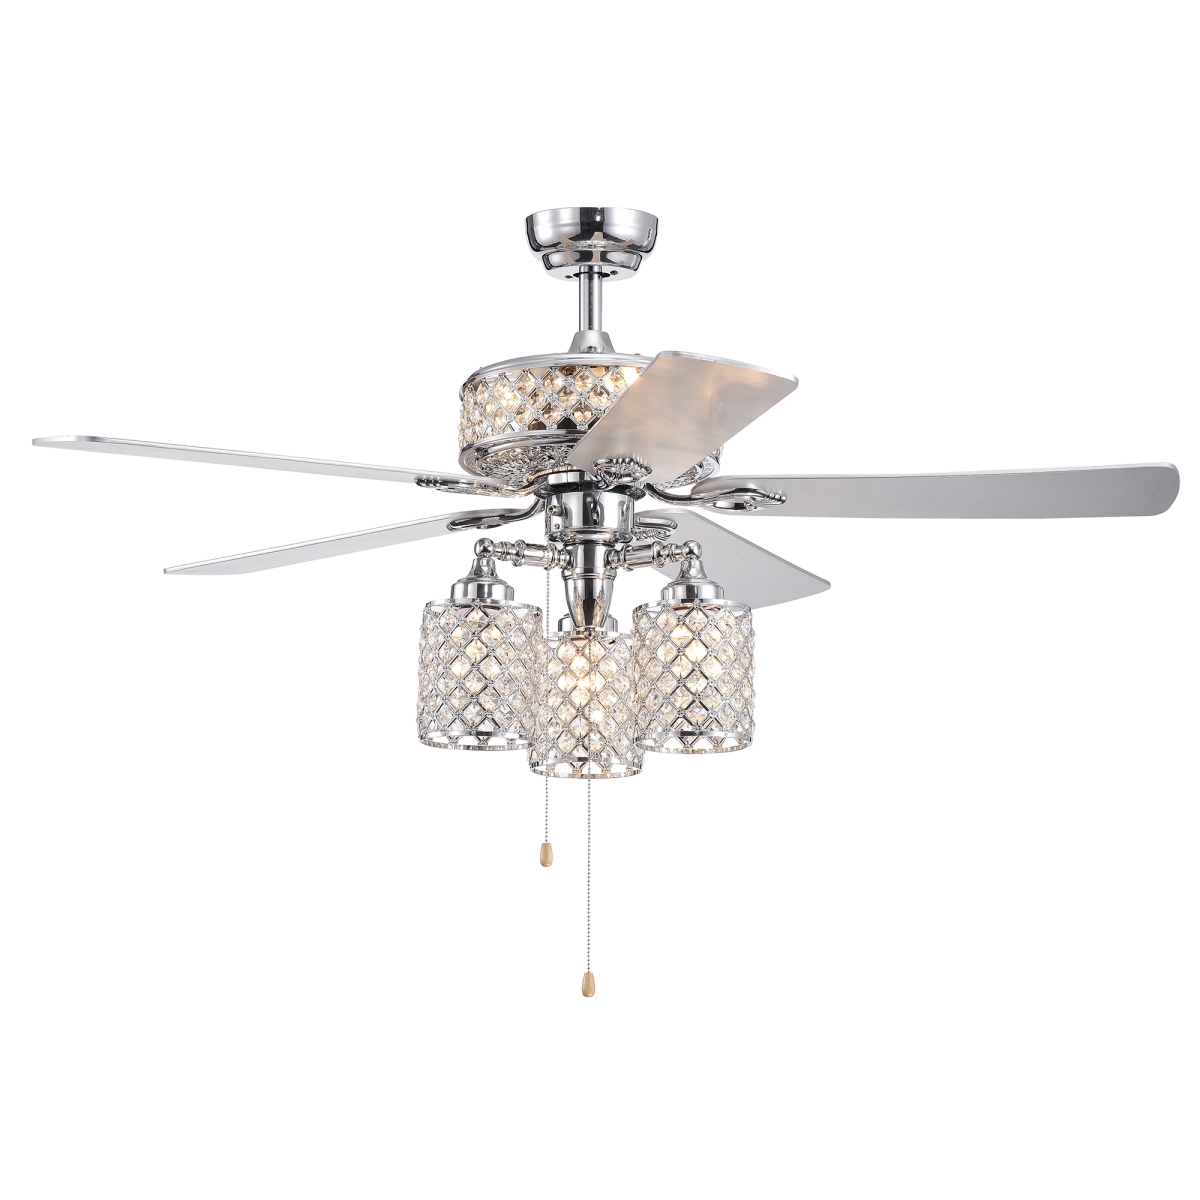 Cfl-8347ch 52 In. Treista 5-blade Lighted Ceiling Fan With Crystal Lattice Shades, Silver Chrome